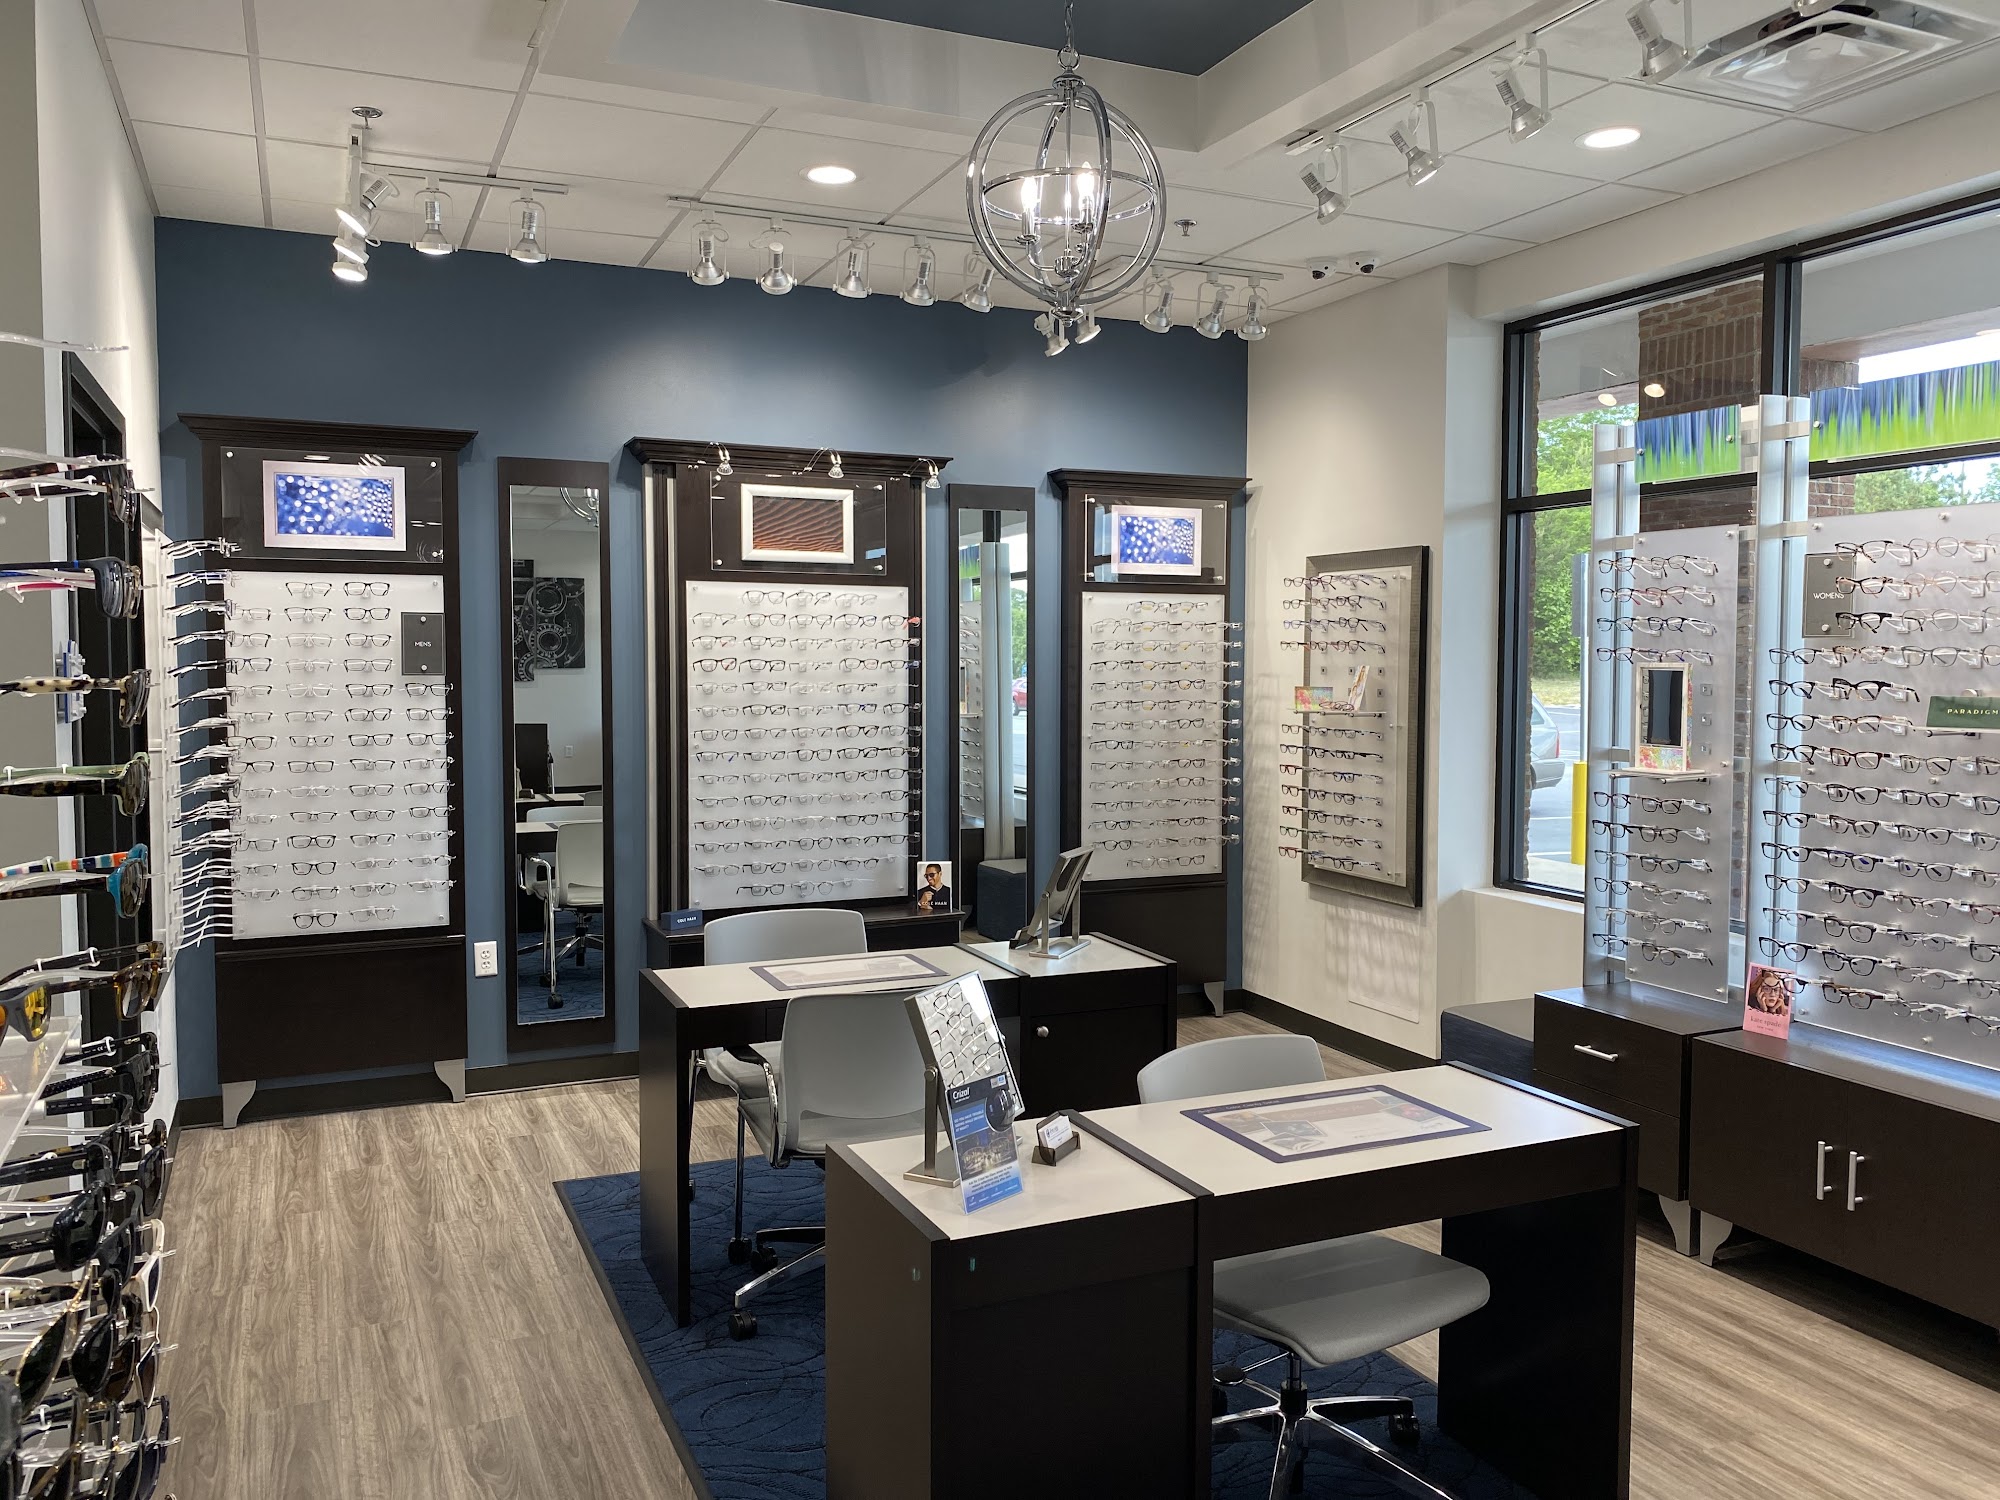 The EyeCare Group